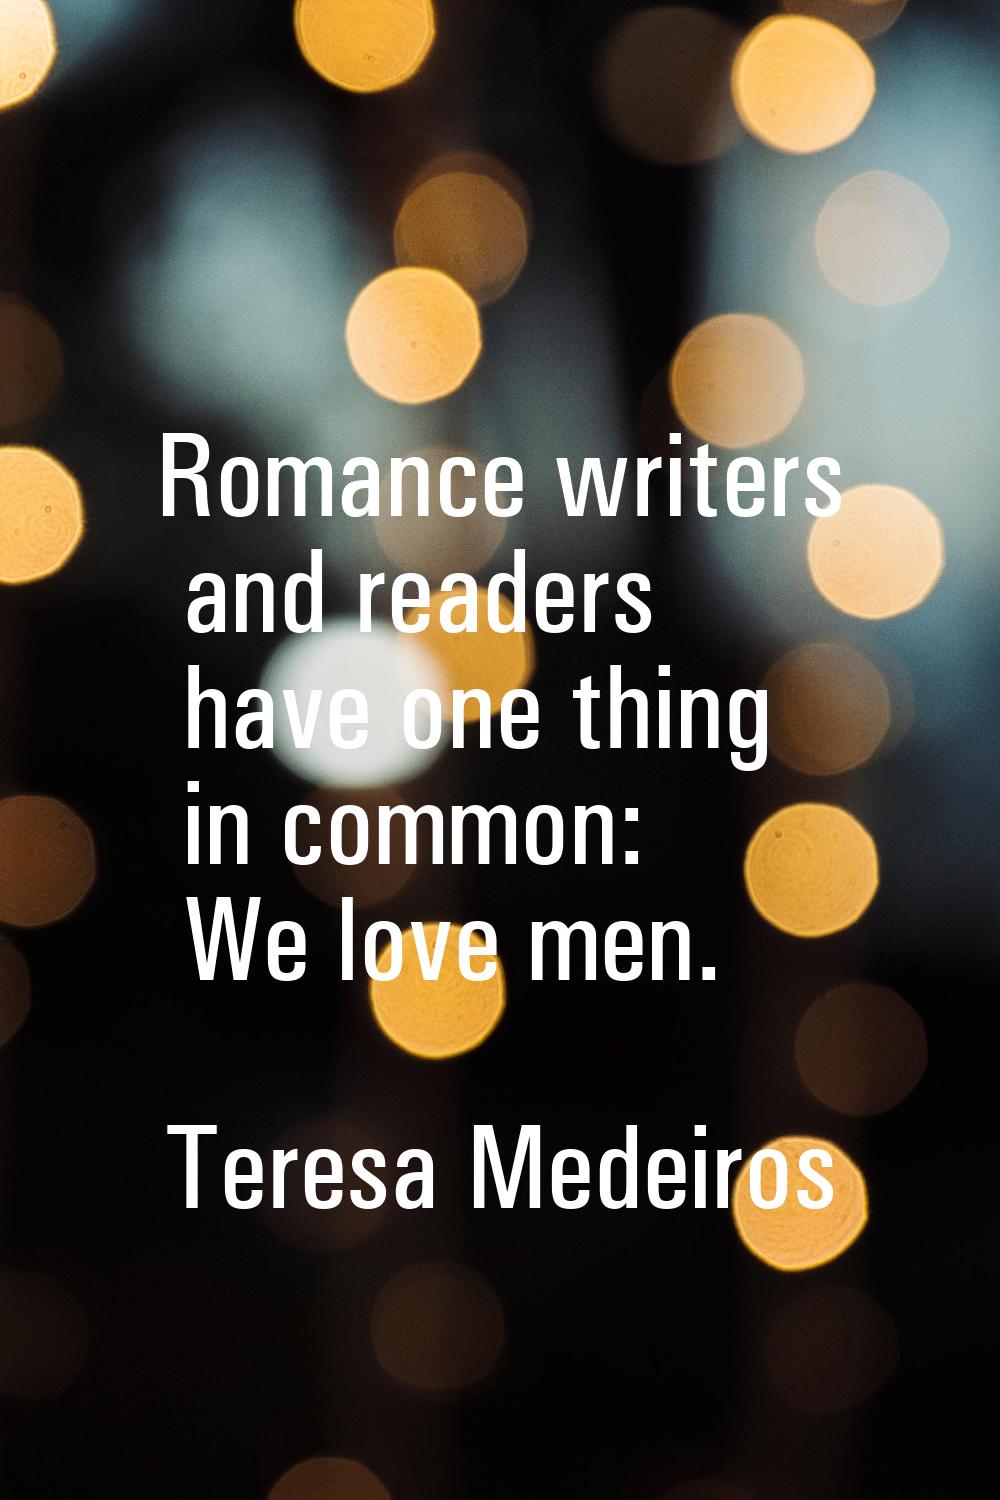 Romance writers and readers have one thing in common: We love men.